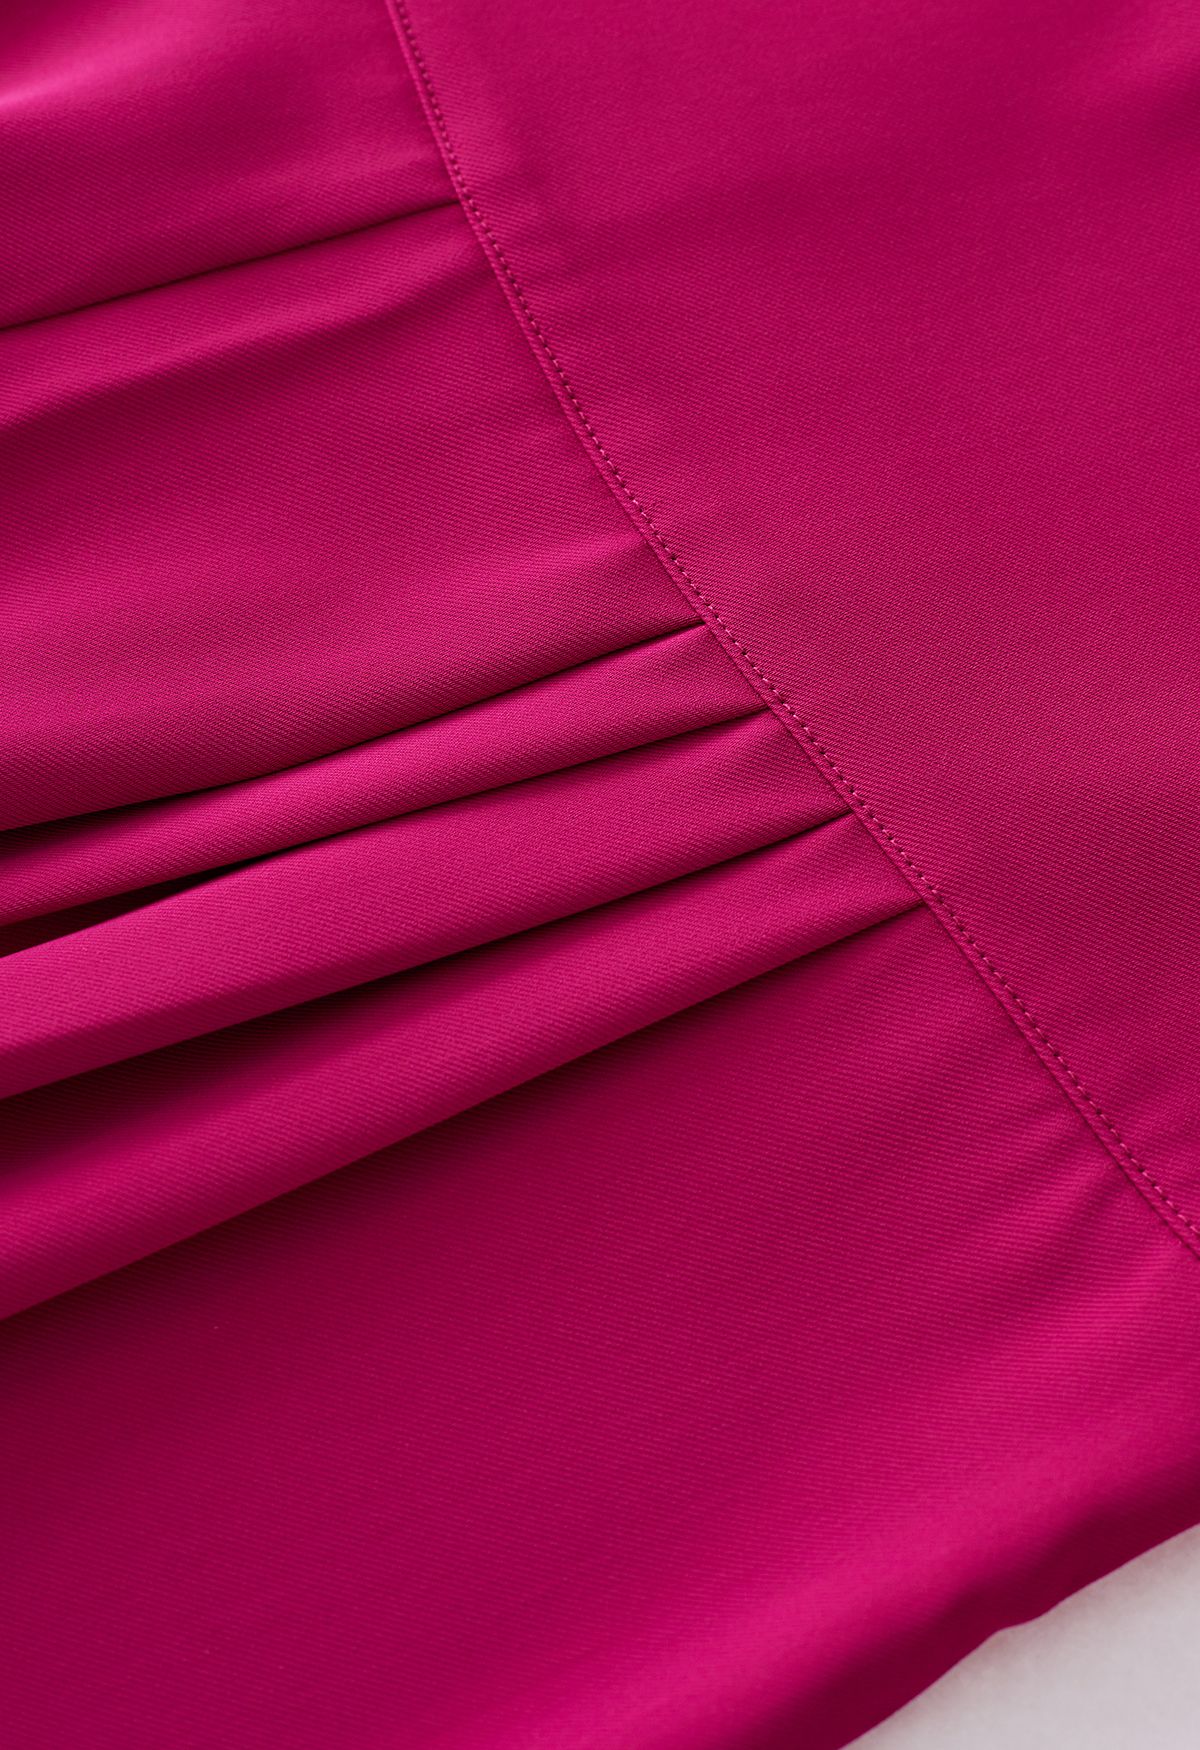 Bowknot High Waist Wide-Leg Pants in Magenta - Retro, Indie and Unique ...